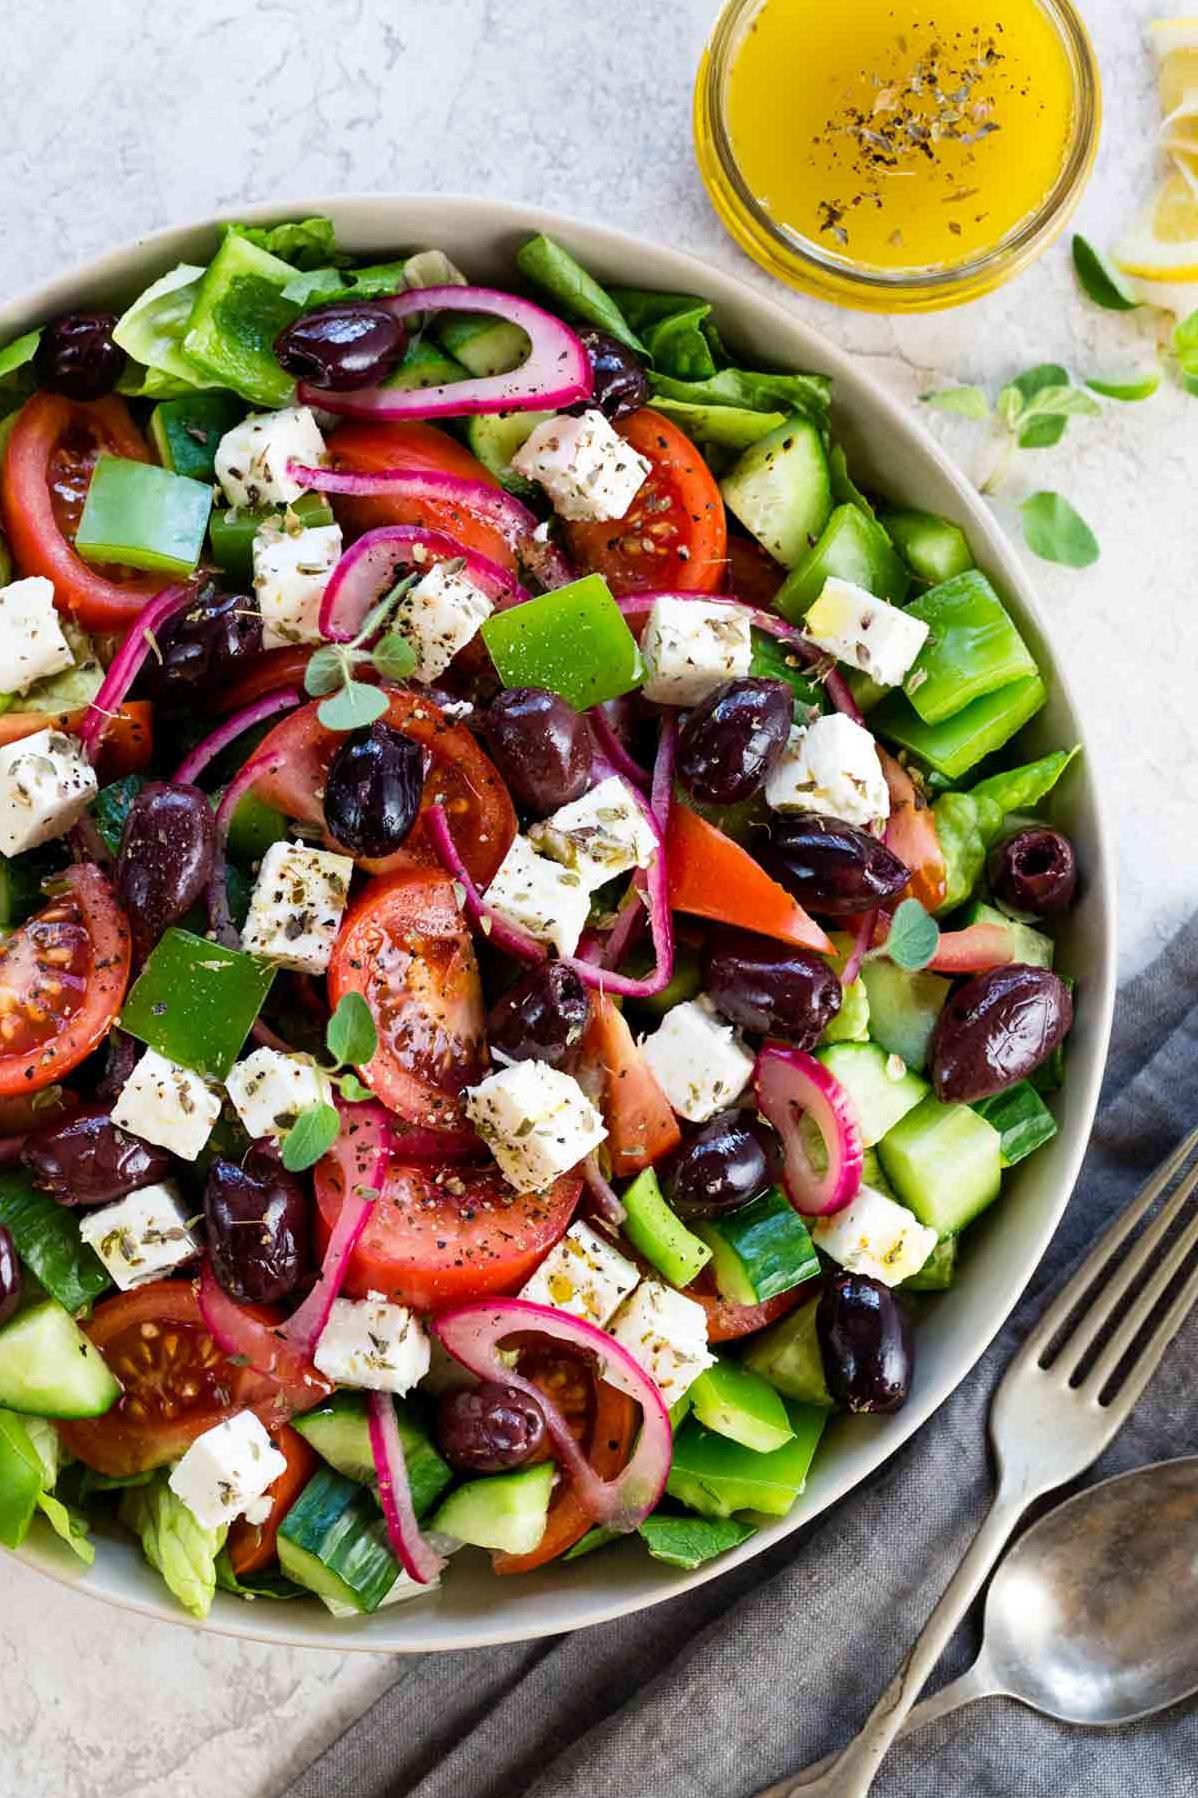  The combination of feta cheese and kalamata olives adds a tangy burst of flavor to this salad.